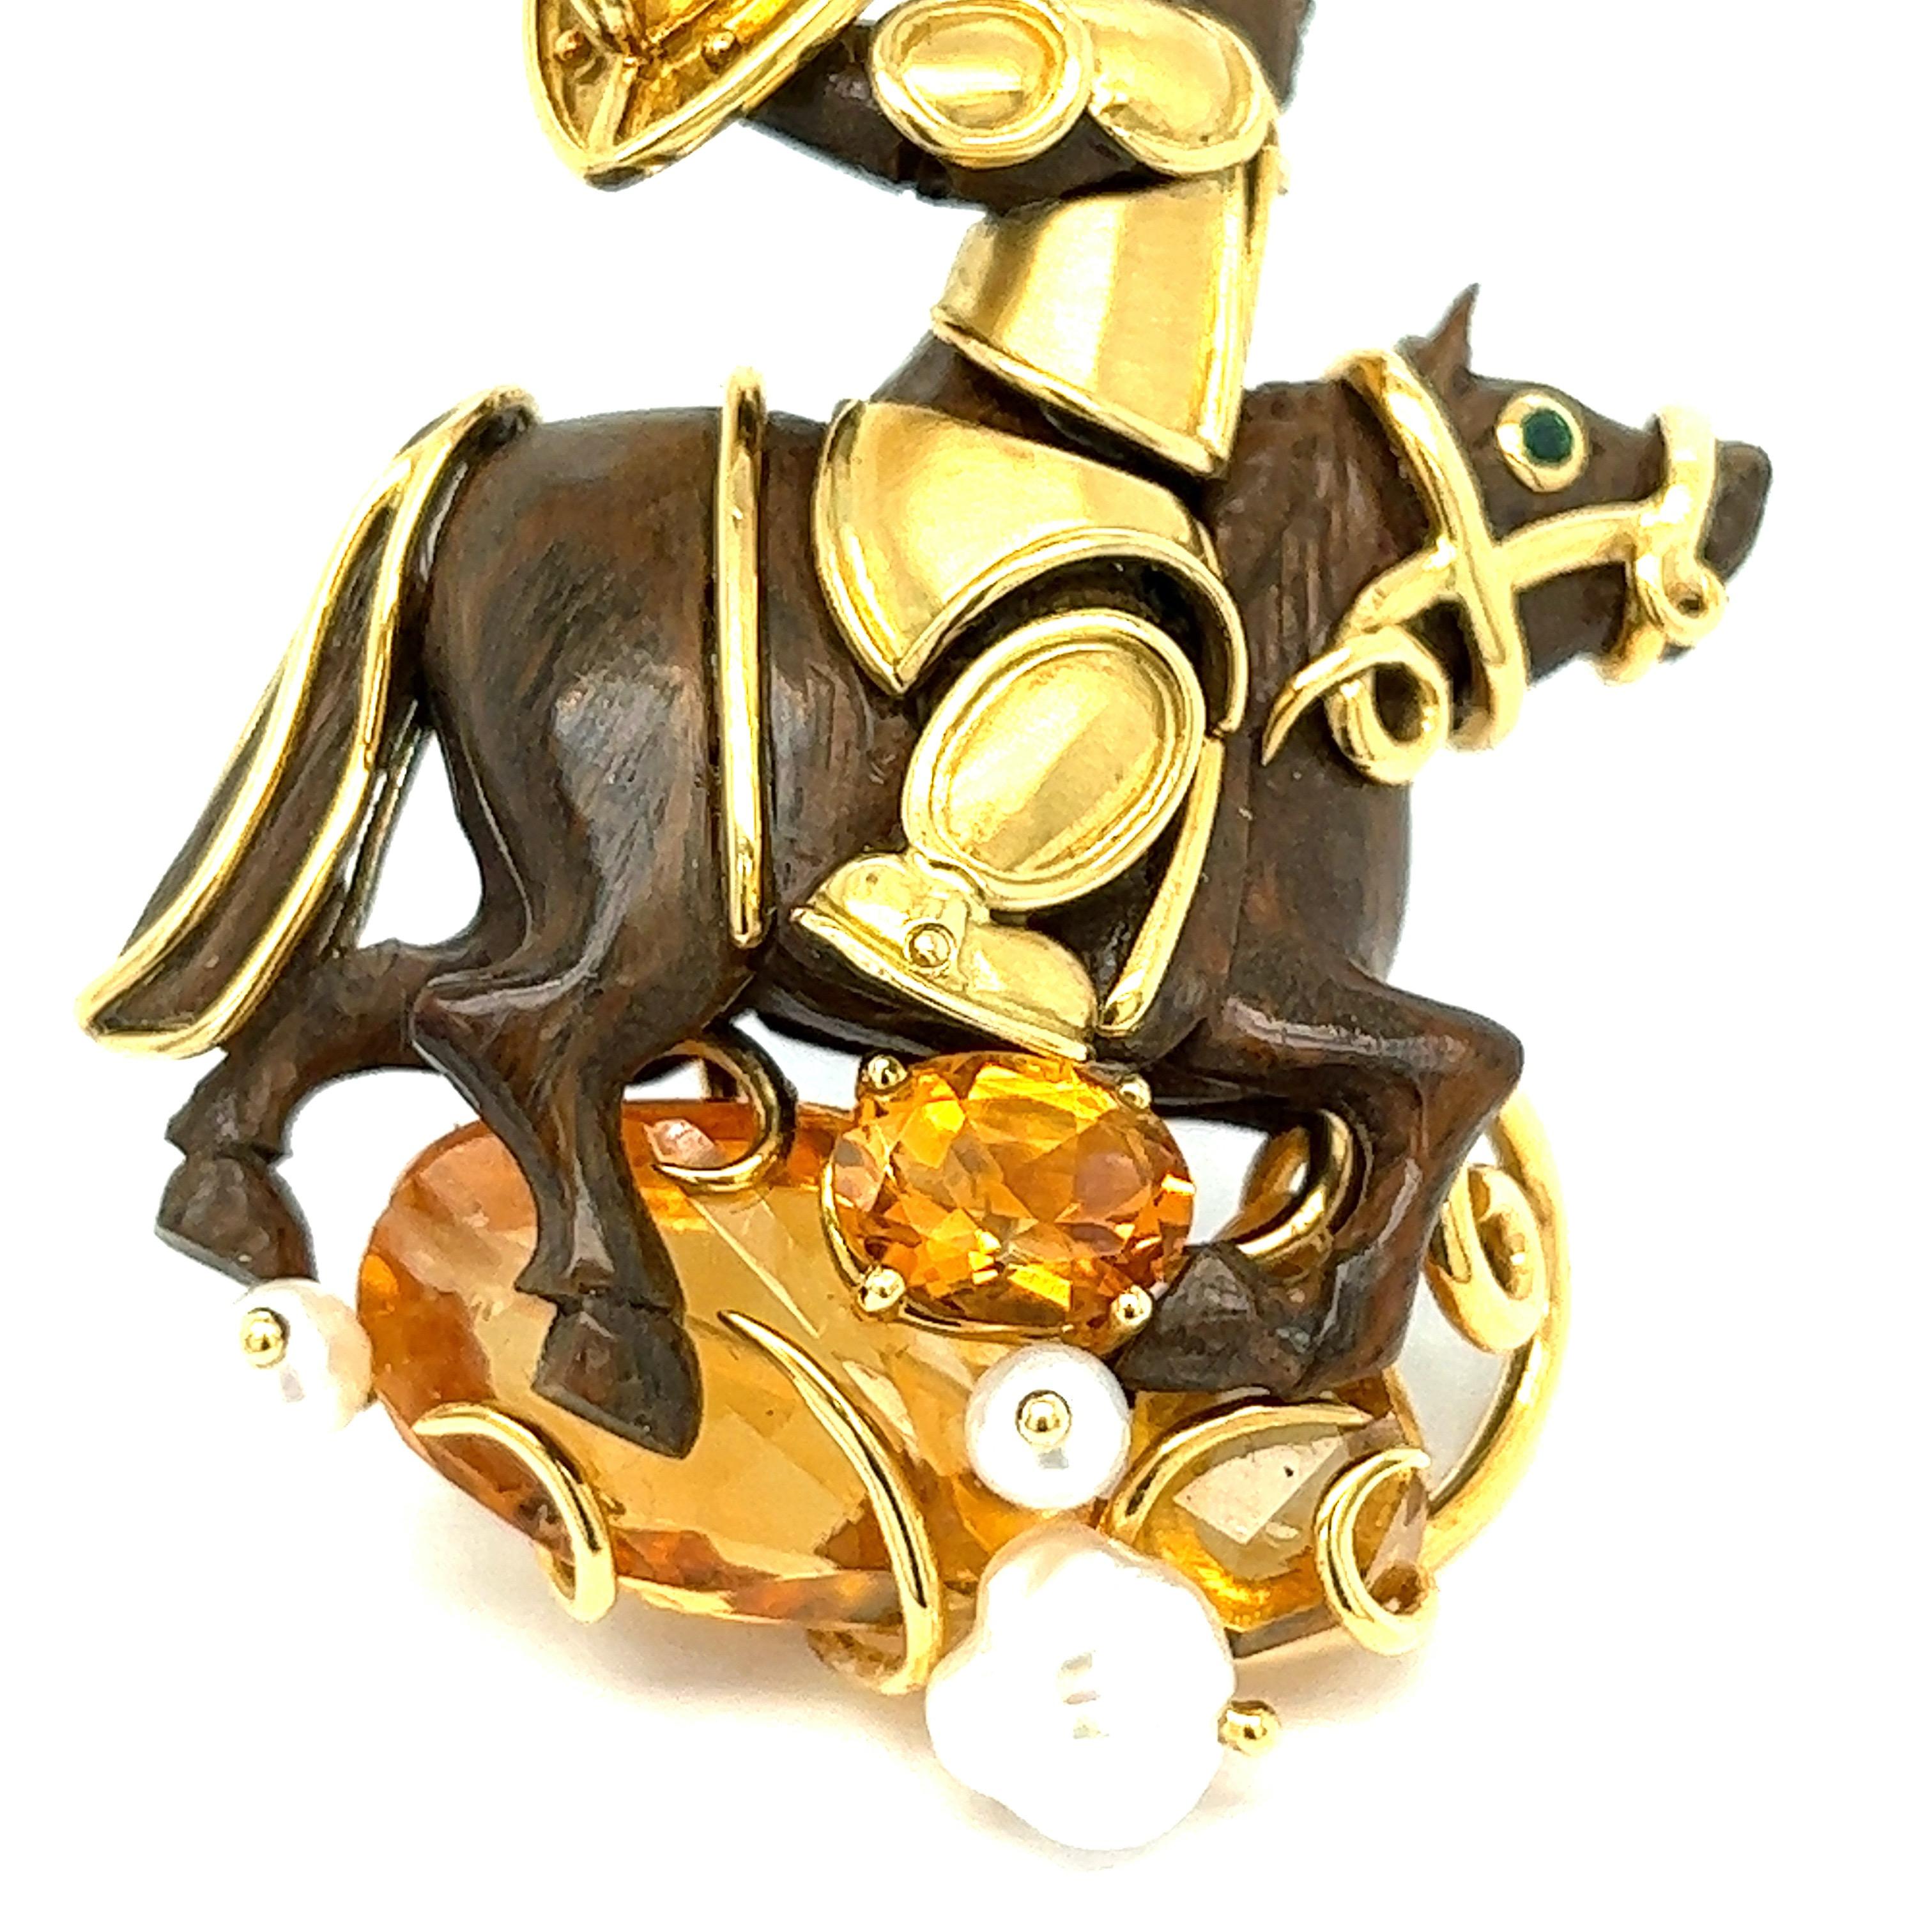 Seaman Schepps gold wooden brooch

An armored warrior on a horse, featuring citrine, amber, and pearls; 18 karat yellow gold; marked Seaman Schepps, 750, 19090

Size: width 1.31 inches, length 2 inches
Total weight: 19.5 grams